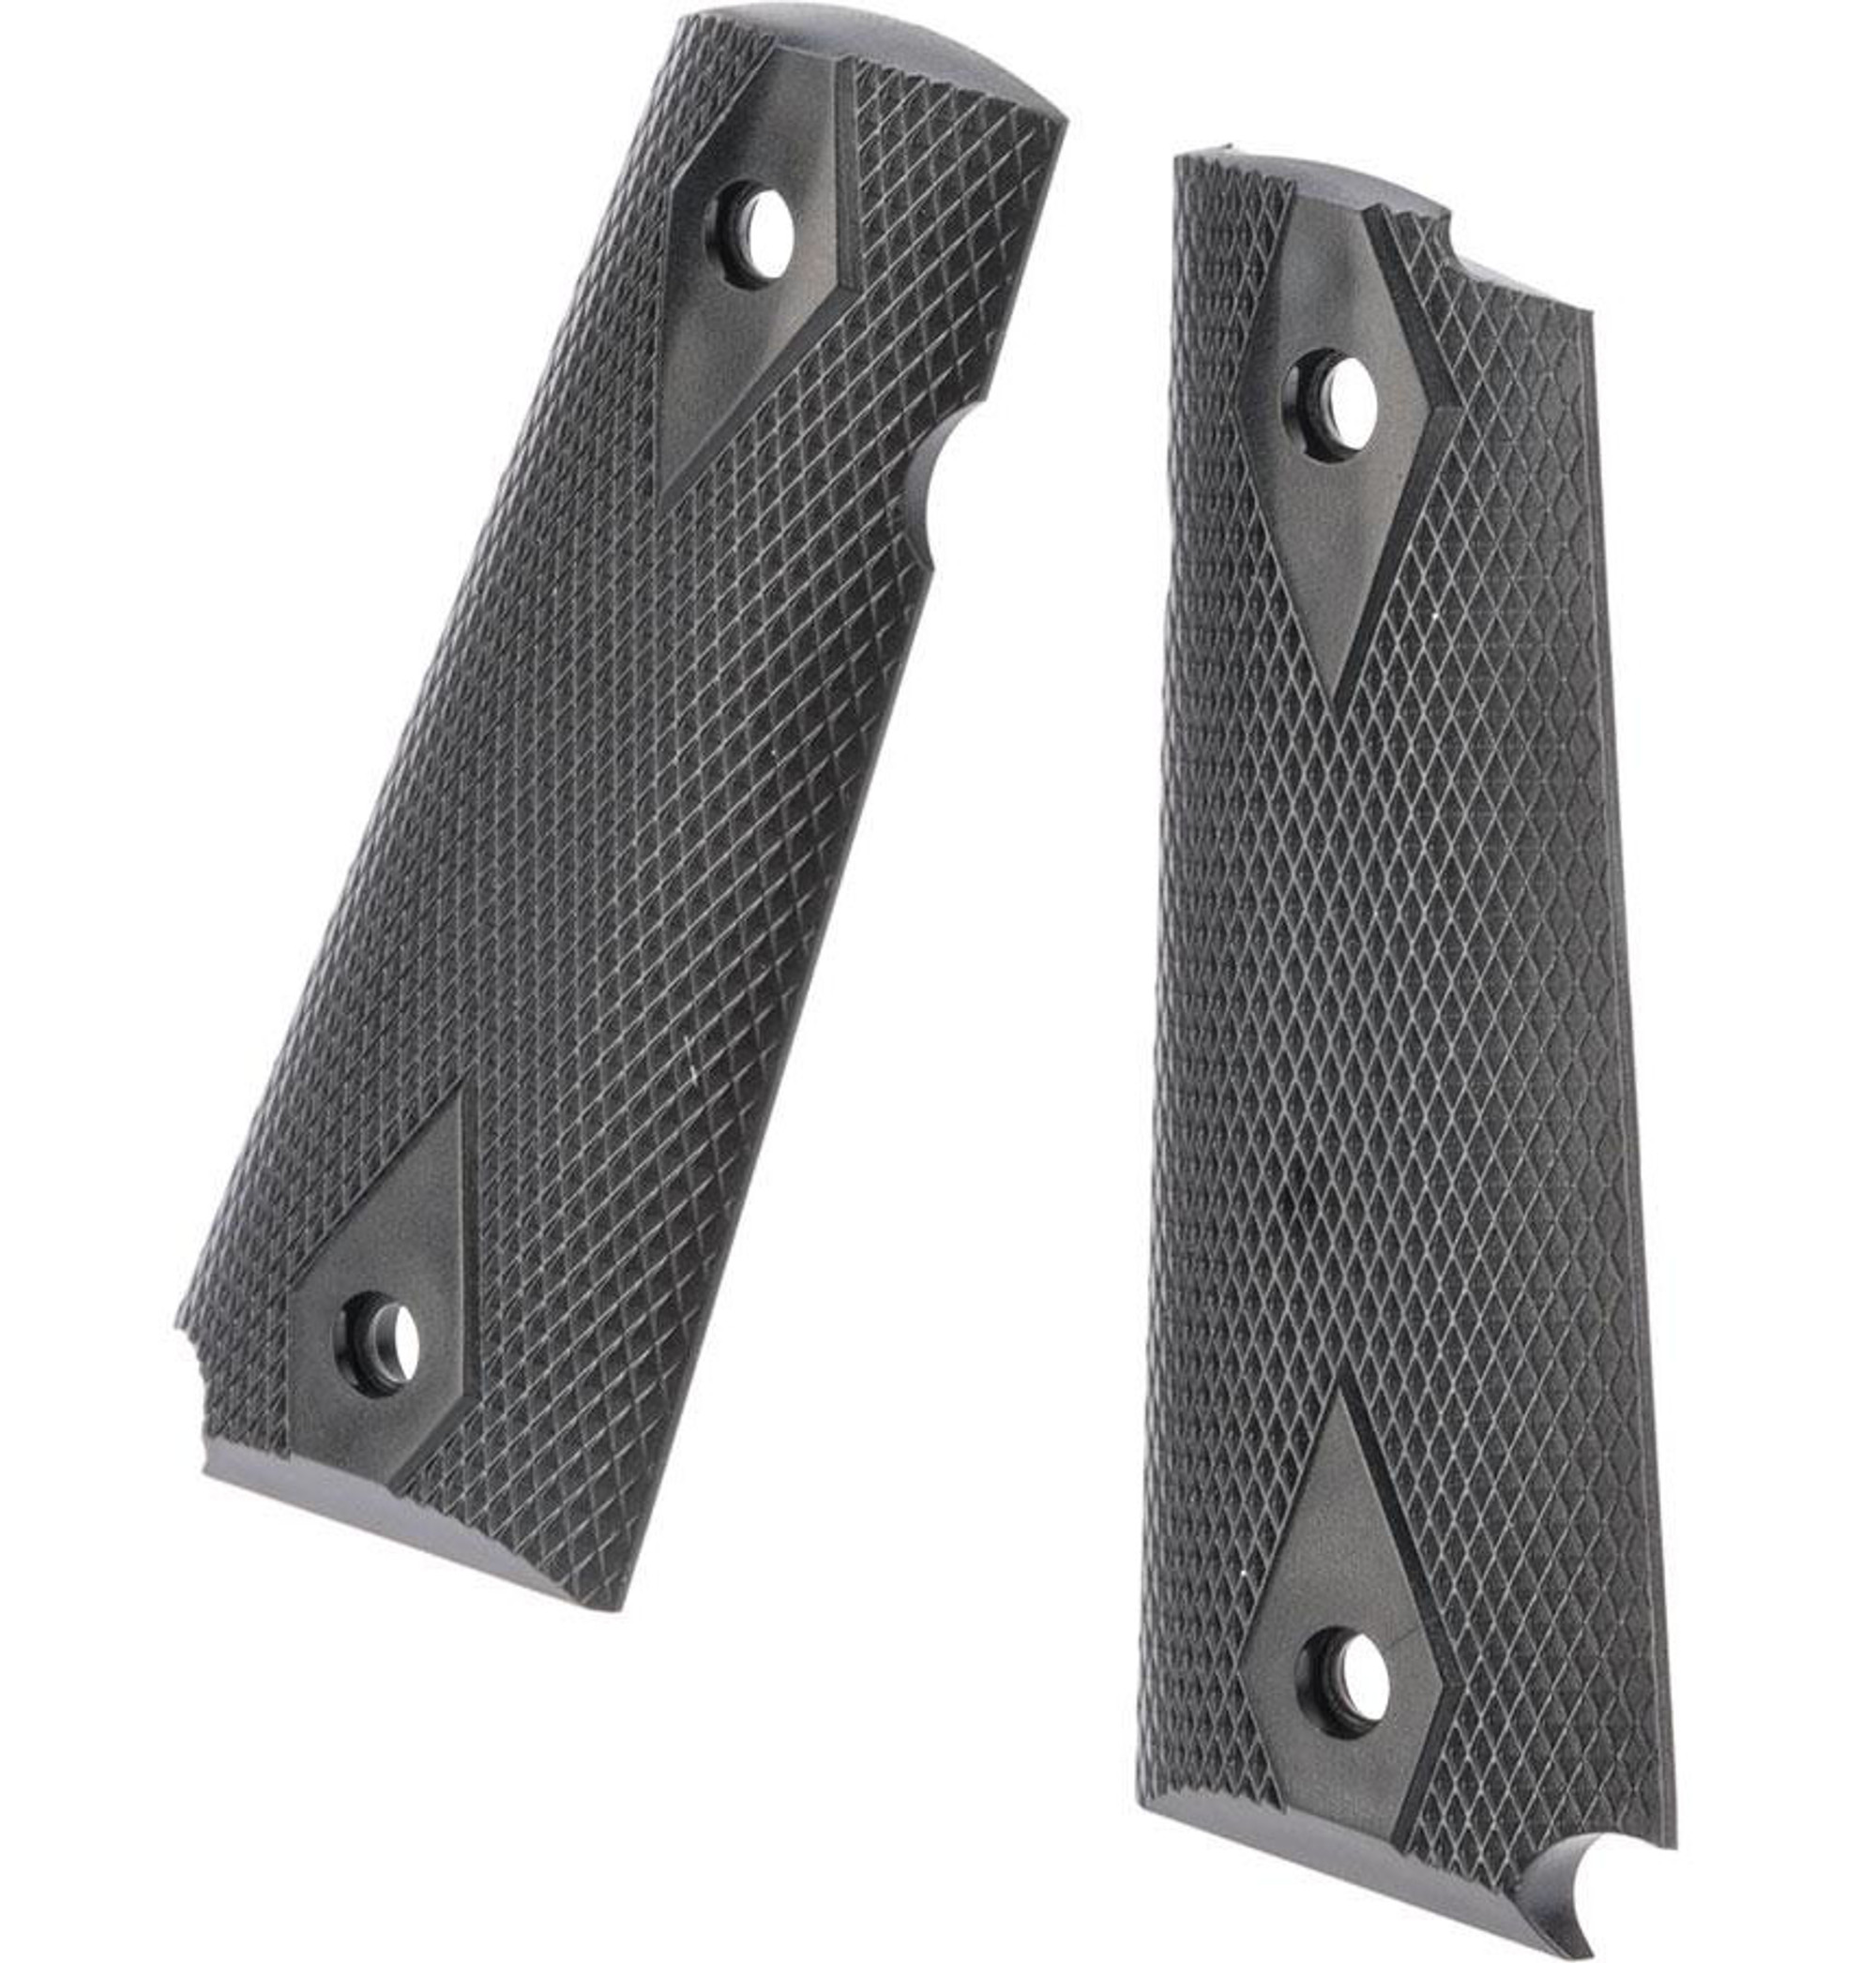 VFC Stylized Grip Panels for 1911 Airsoft Pistols (Style: Diamond Grips)